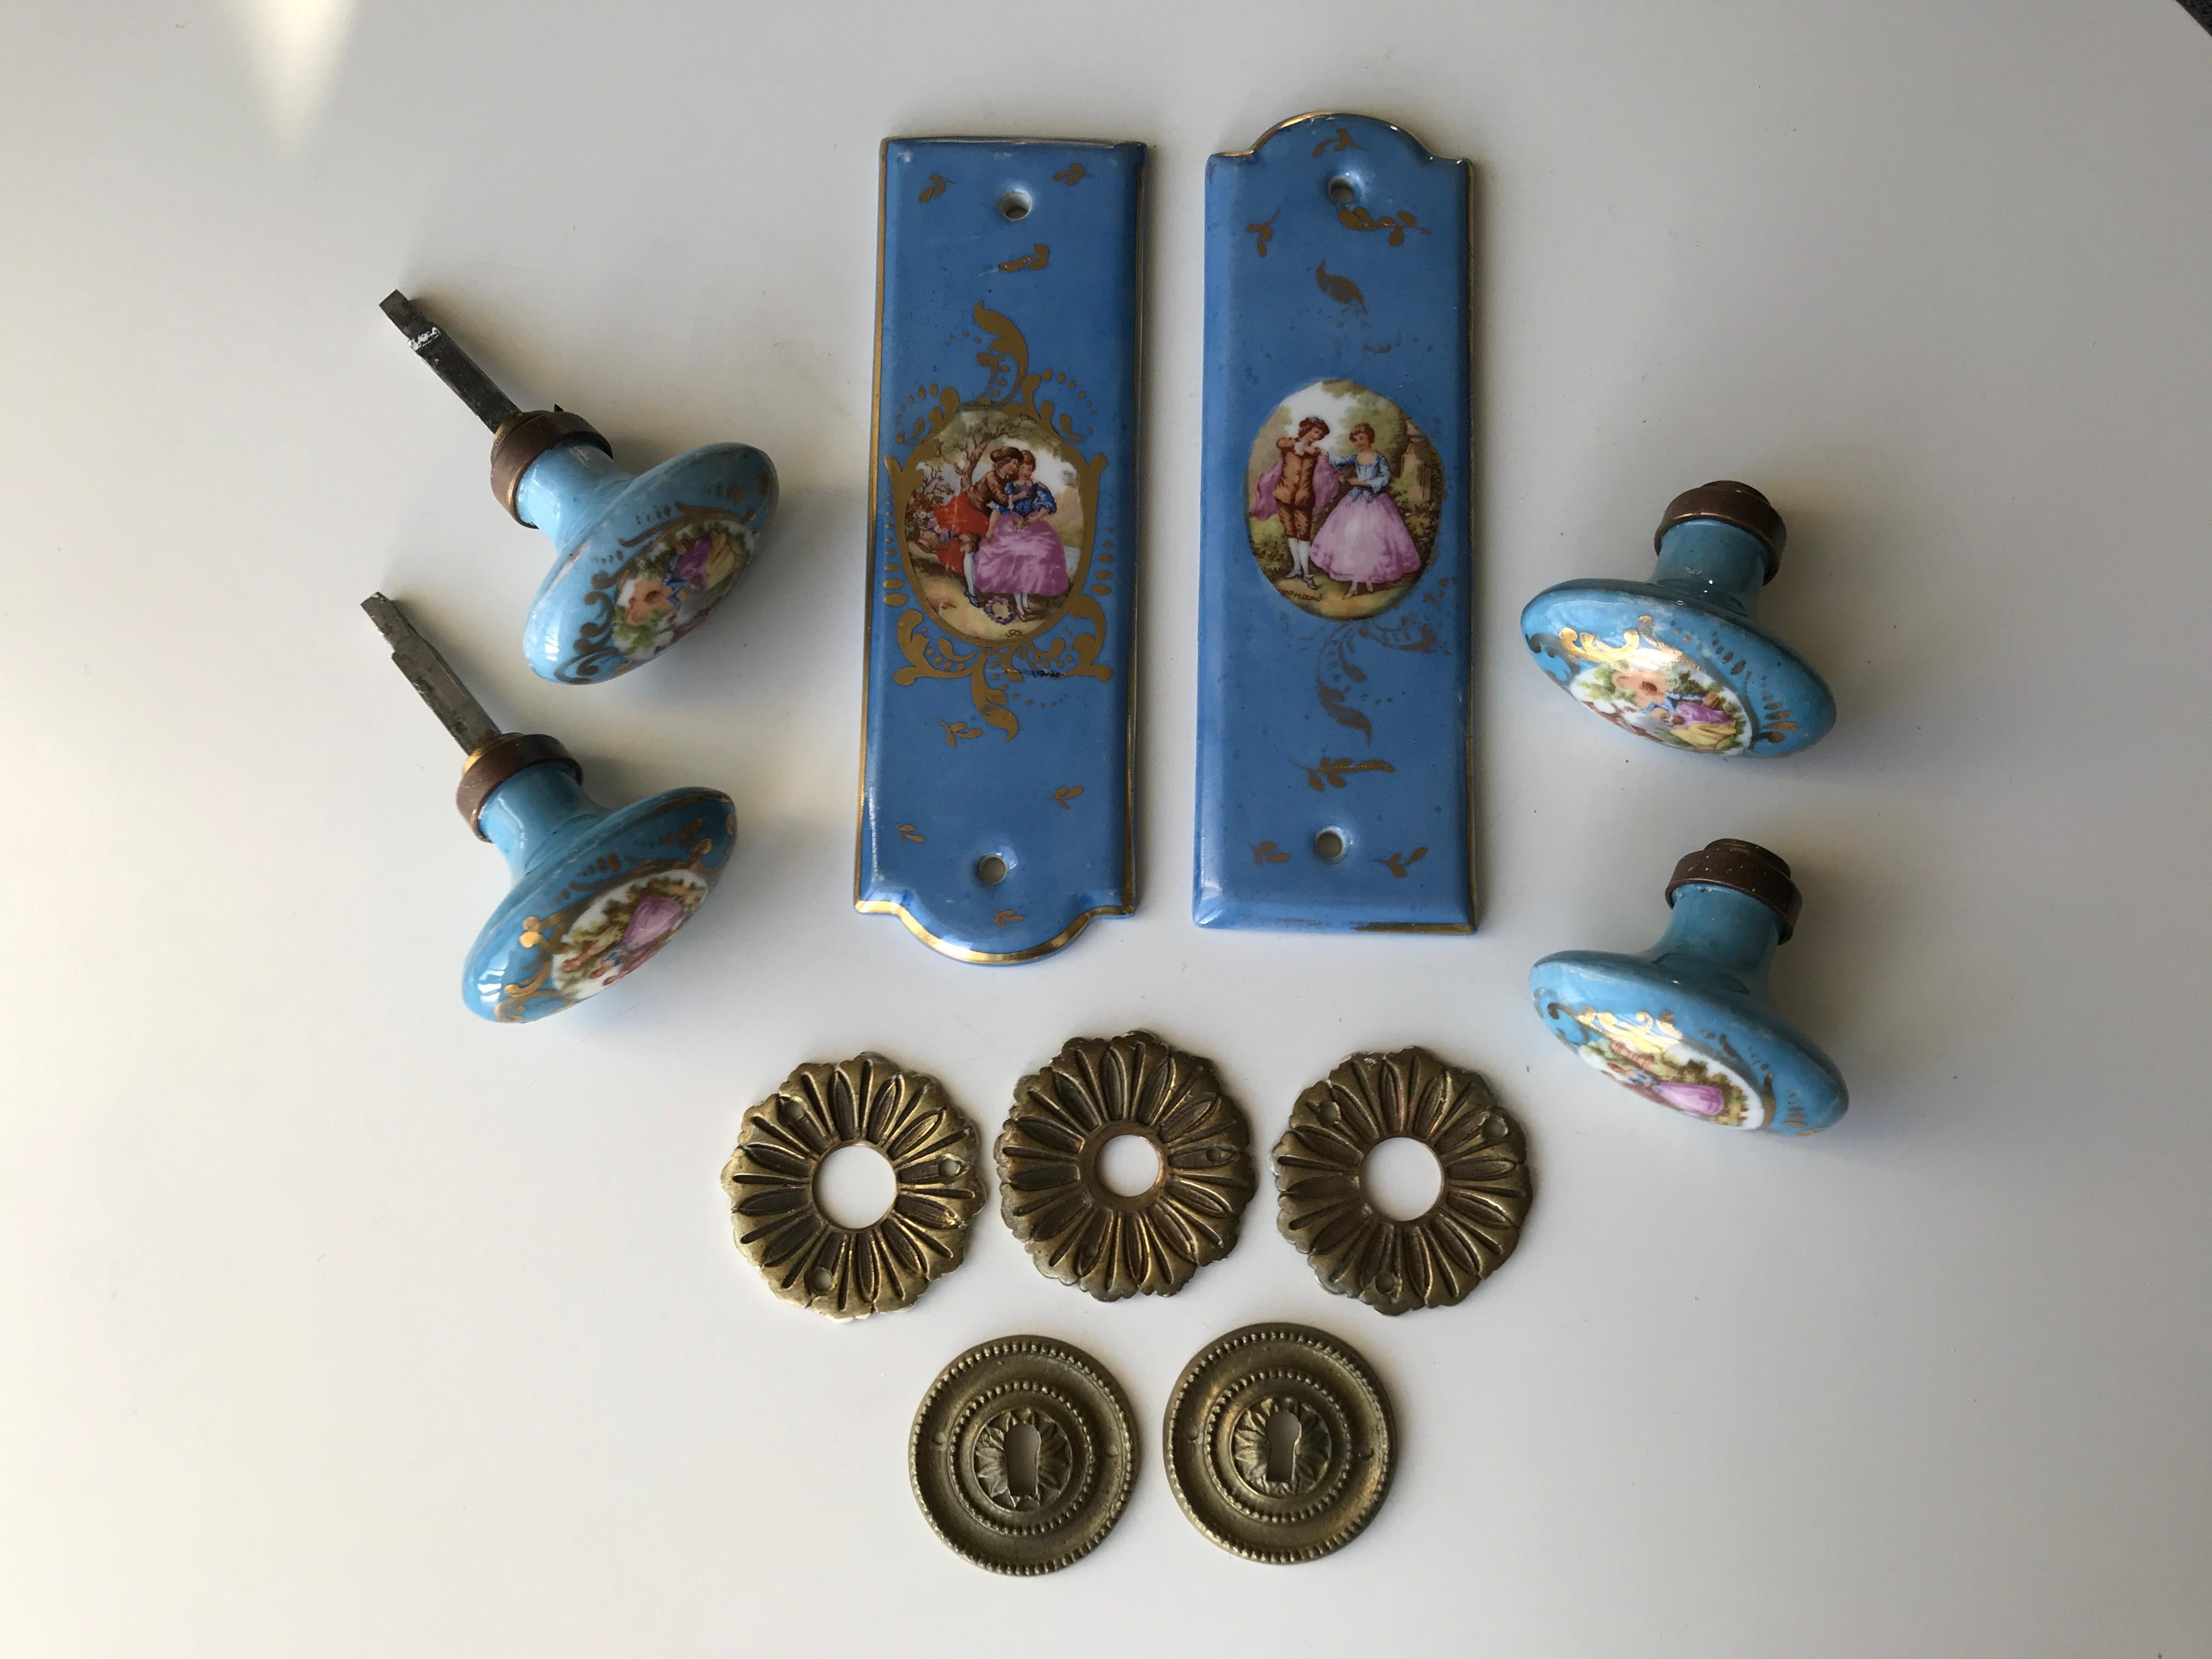 Antique French Limoges porcelain door knob. Pair of door knobs or could be used as decorative handles on a cupboard or drawer. Notice that the set is not complete referring to images.